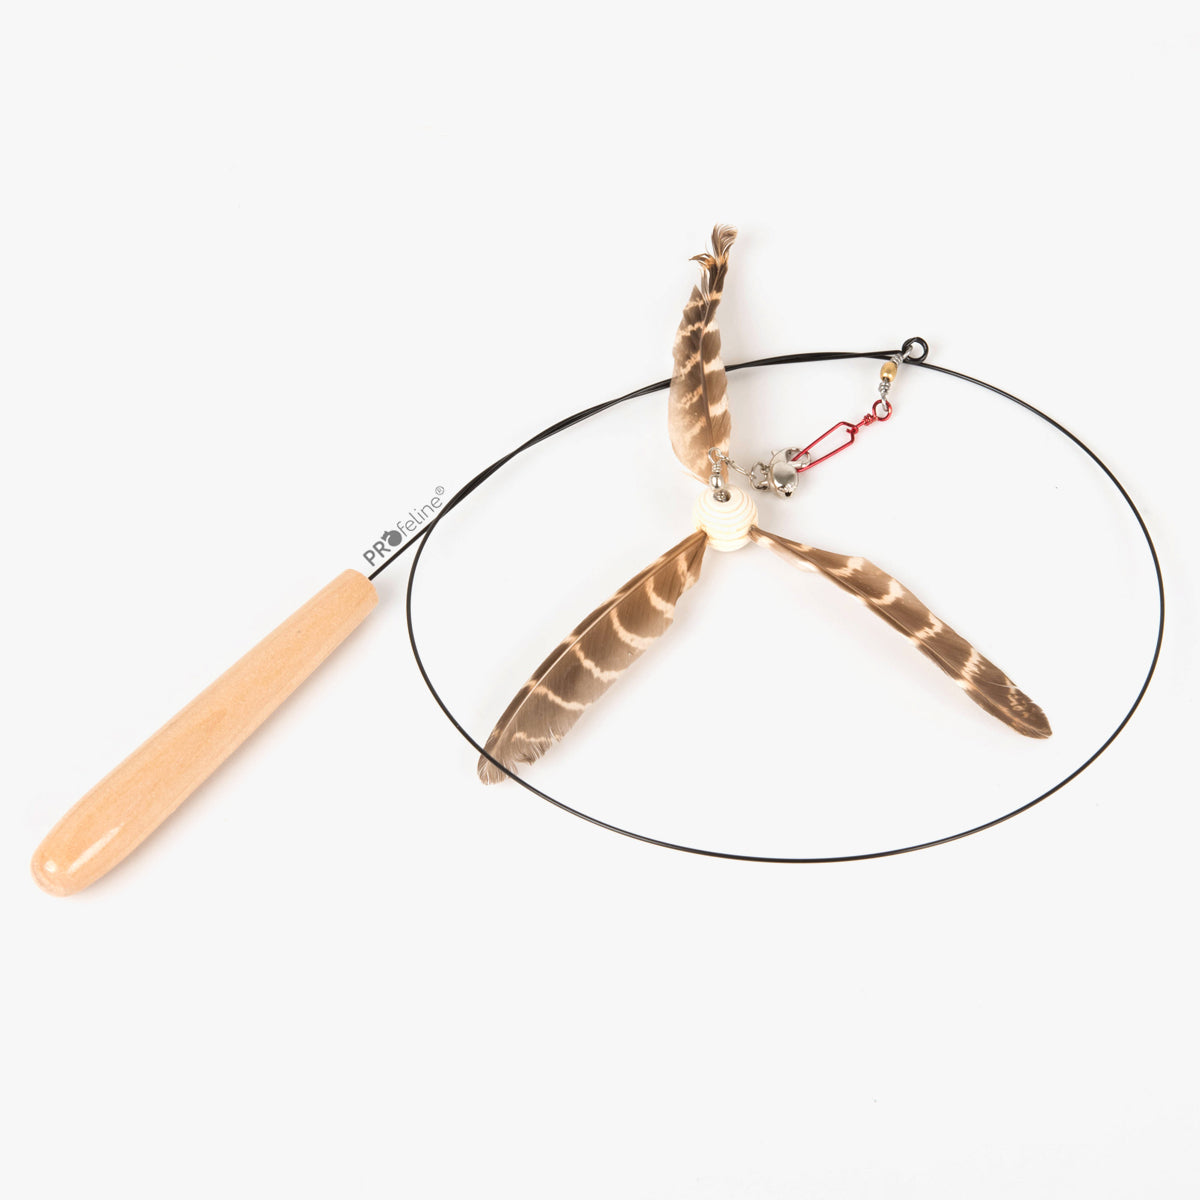 Profeline Propeller Wand Cat Teaser, With Wood Handle & Feather Toy Attachment | at Made Moggie